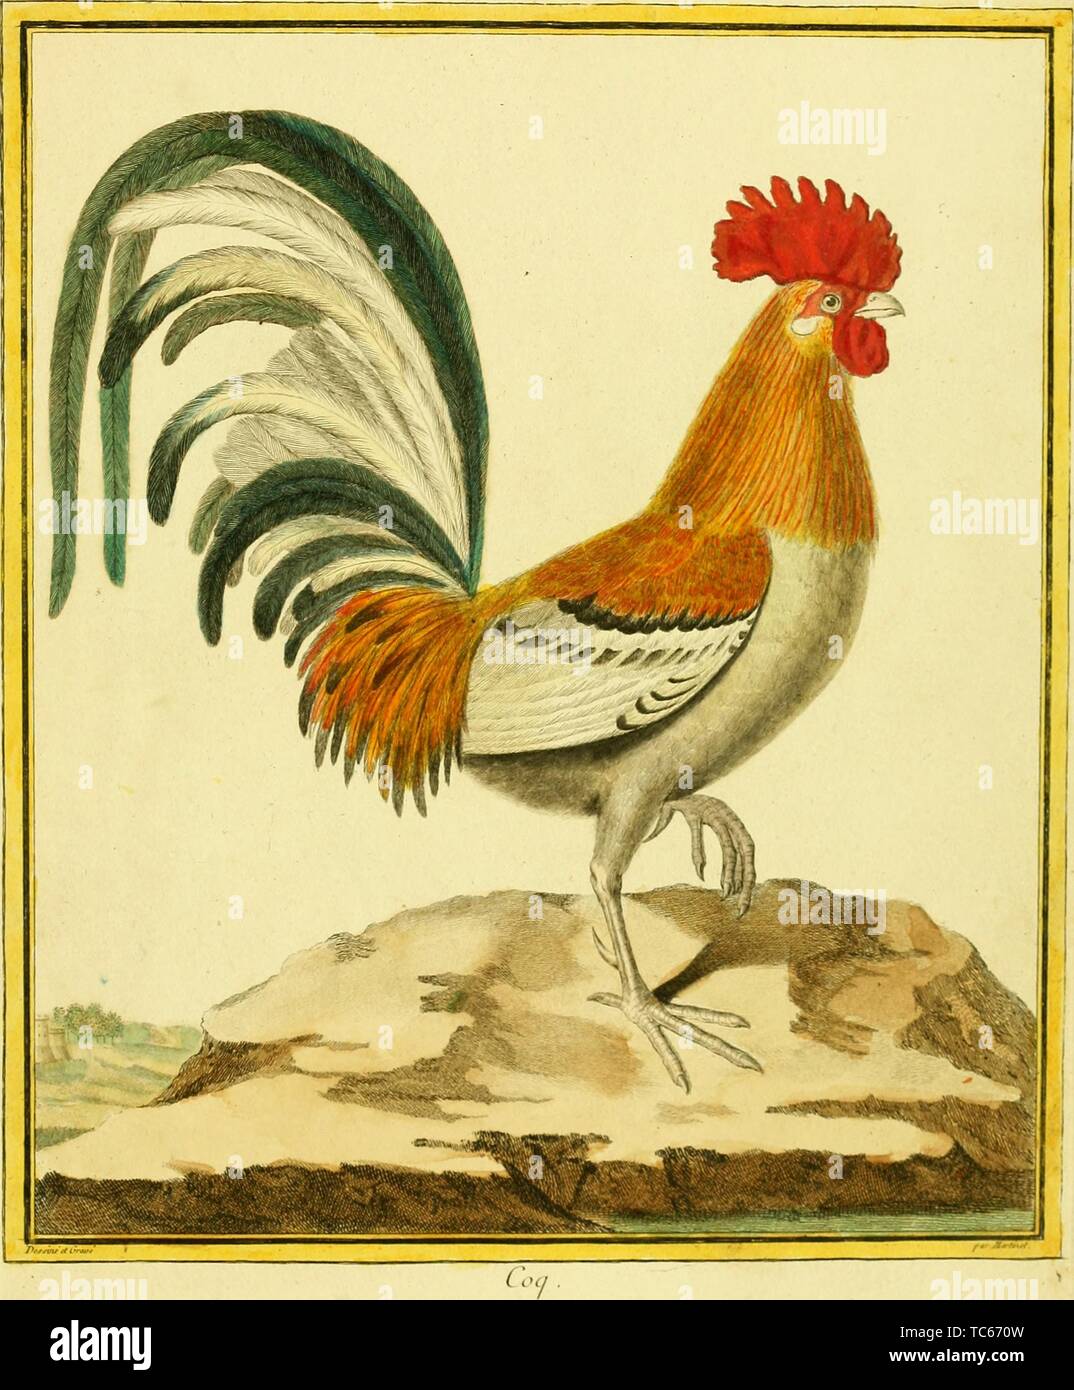 Engraved drawing of the Coq (Phasianus Gallus), from the book 'Planches enluminees Dhistoire naturelle' by Francois Nicolas, Louis Jean Marie Daubenton, and Edme-Louis Daubenton, 1765. Courtesy Internet Archive. () Stock Photo